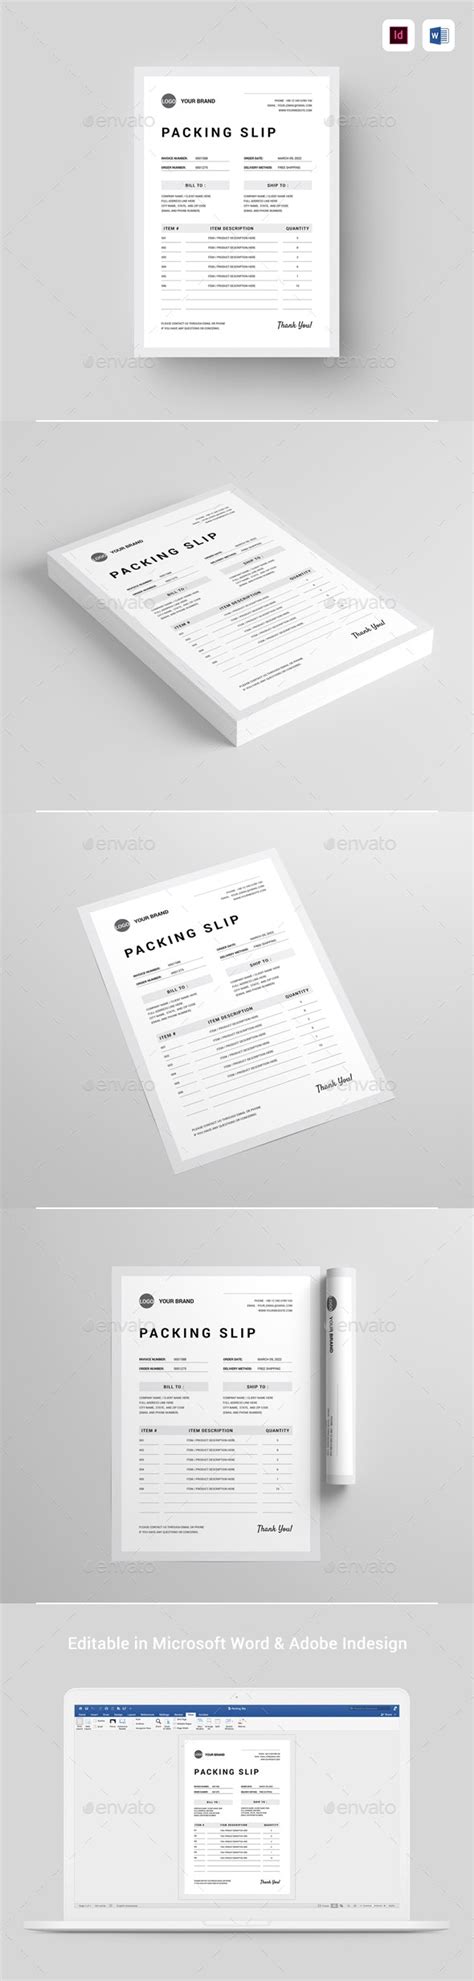 packing slip ms word indesign  lflv graphicriver